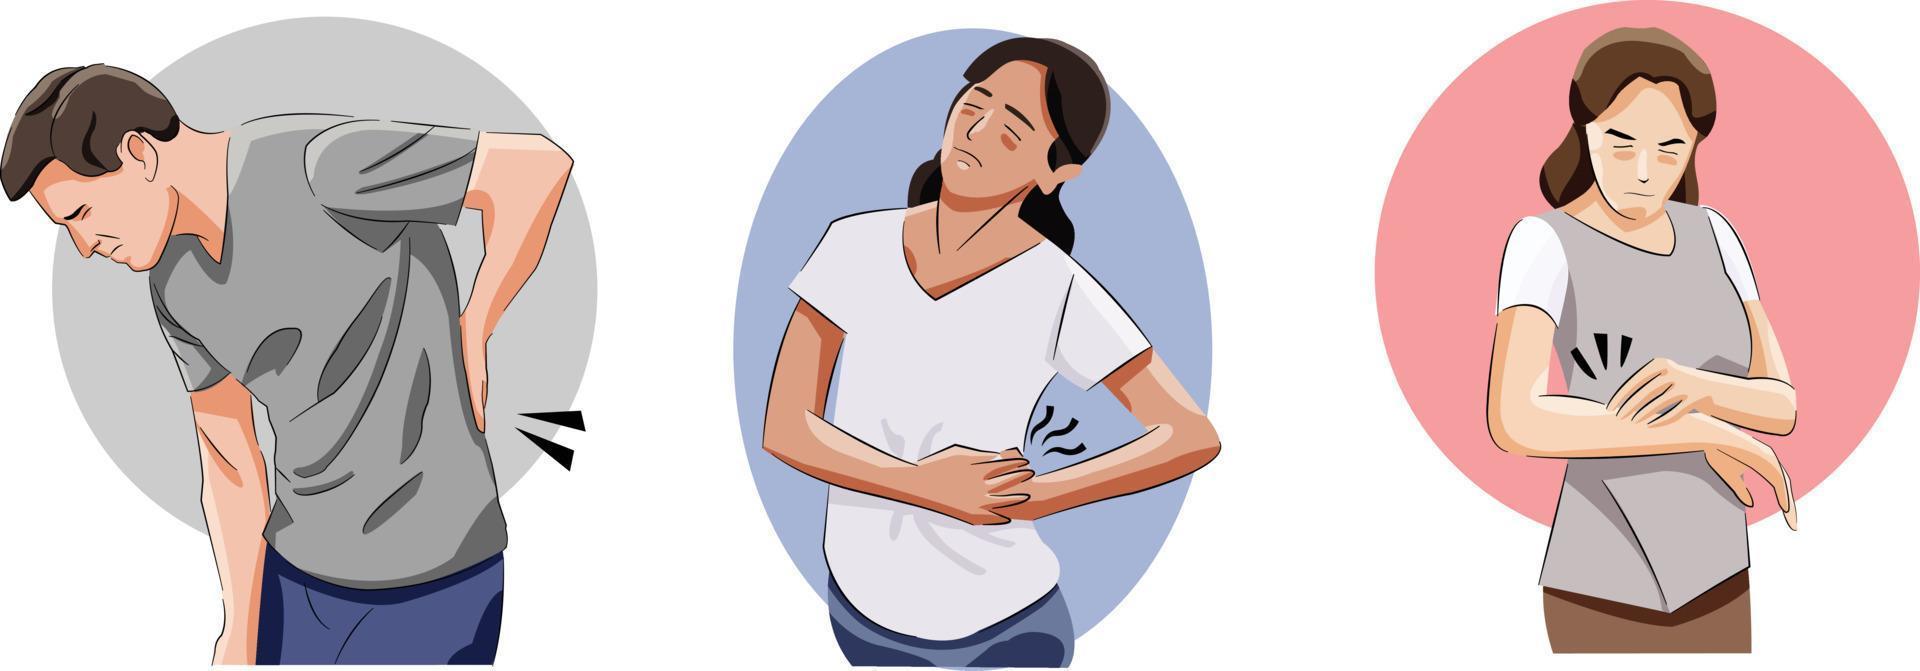 Man and woman having back pain and strain need medical attention vector